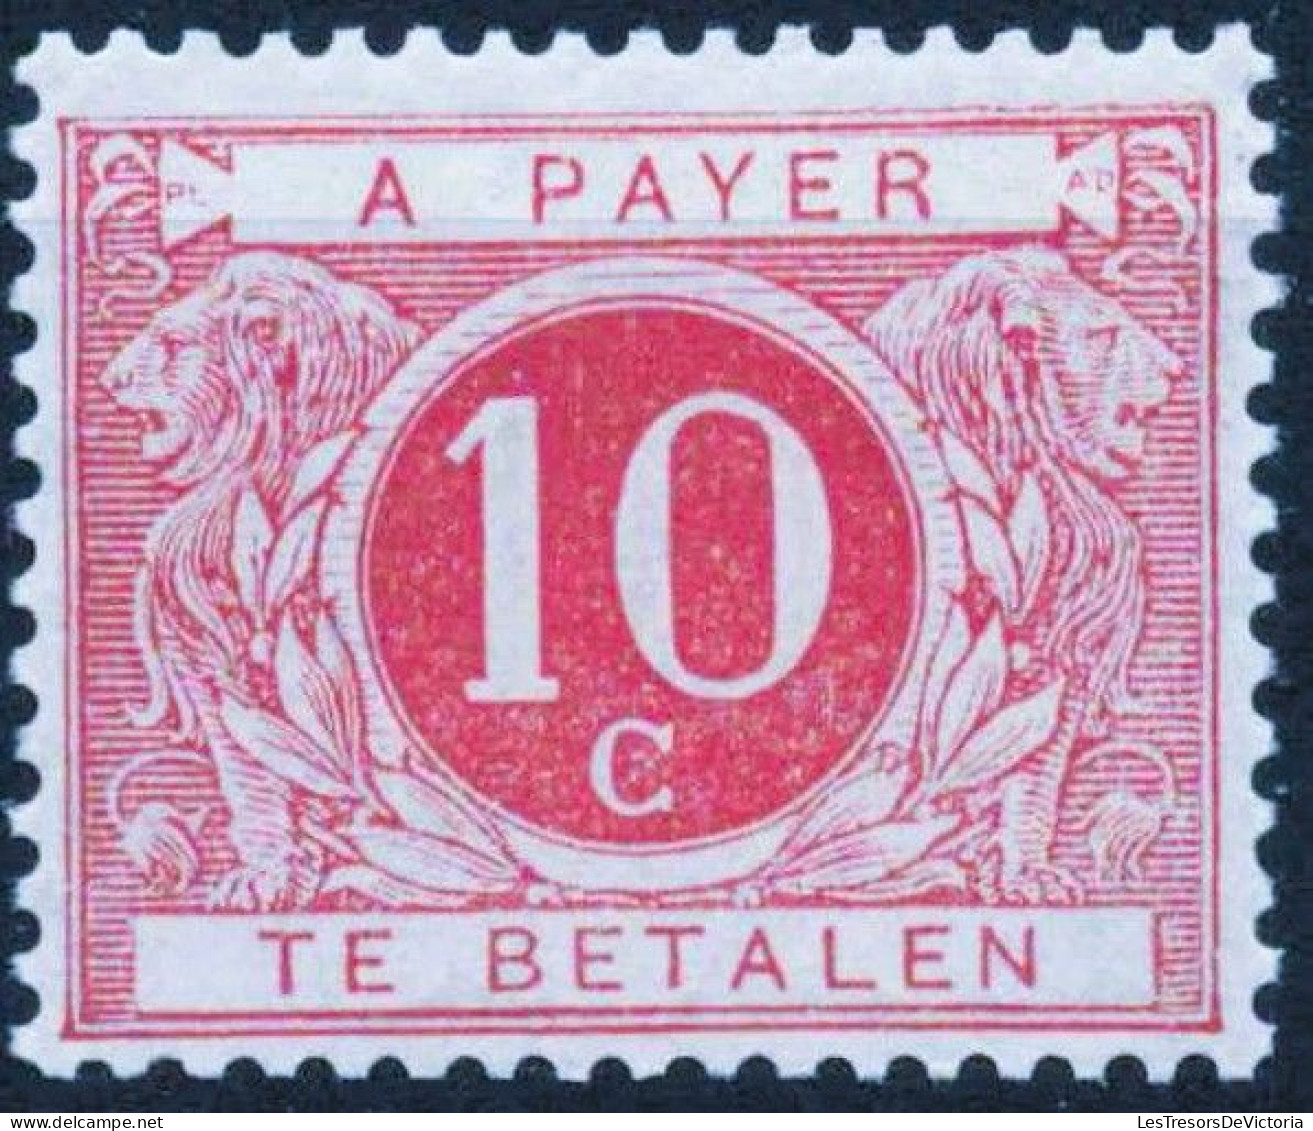 Timbres - Belgique - 1899 - Timbres Taxe - COB TX 4** - Brun Rouge - Cote 130 - Stamps